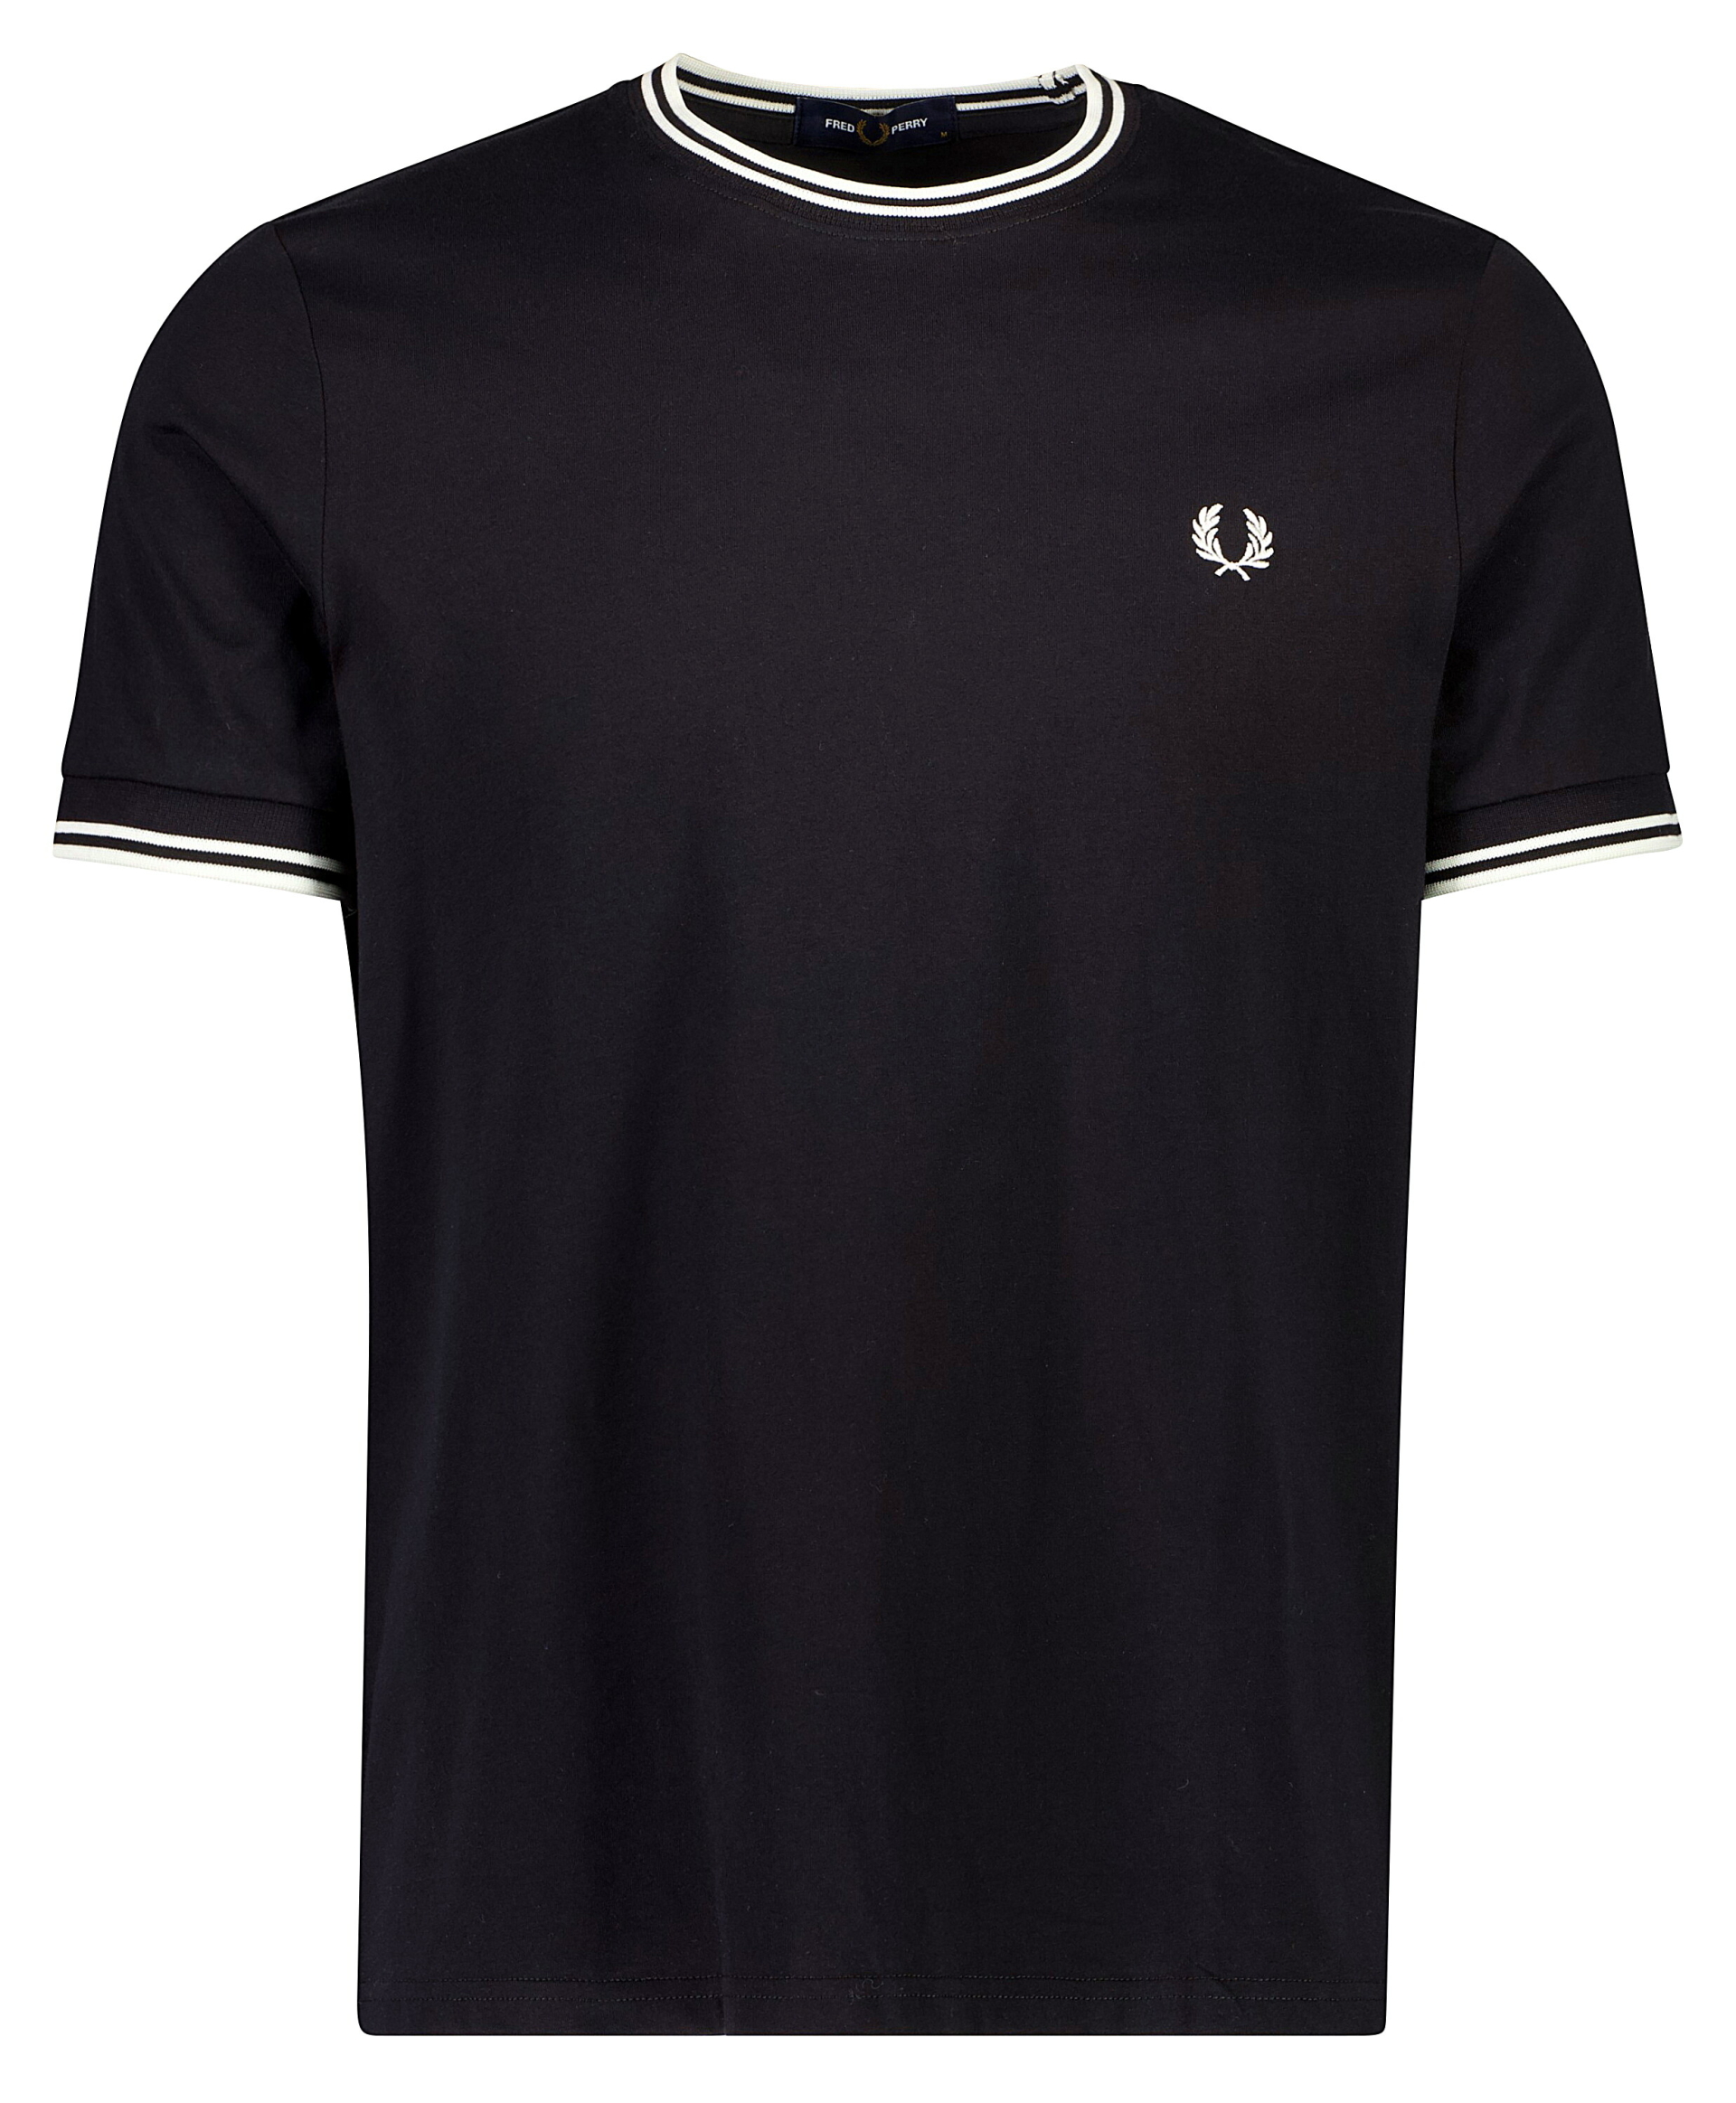 Fred Perry T-shirt sort / 102 black